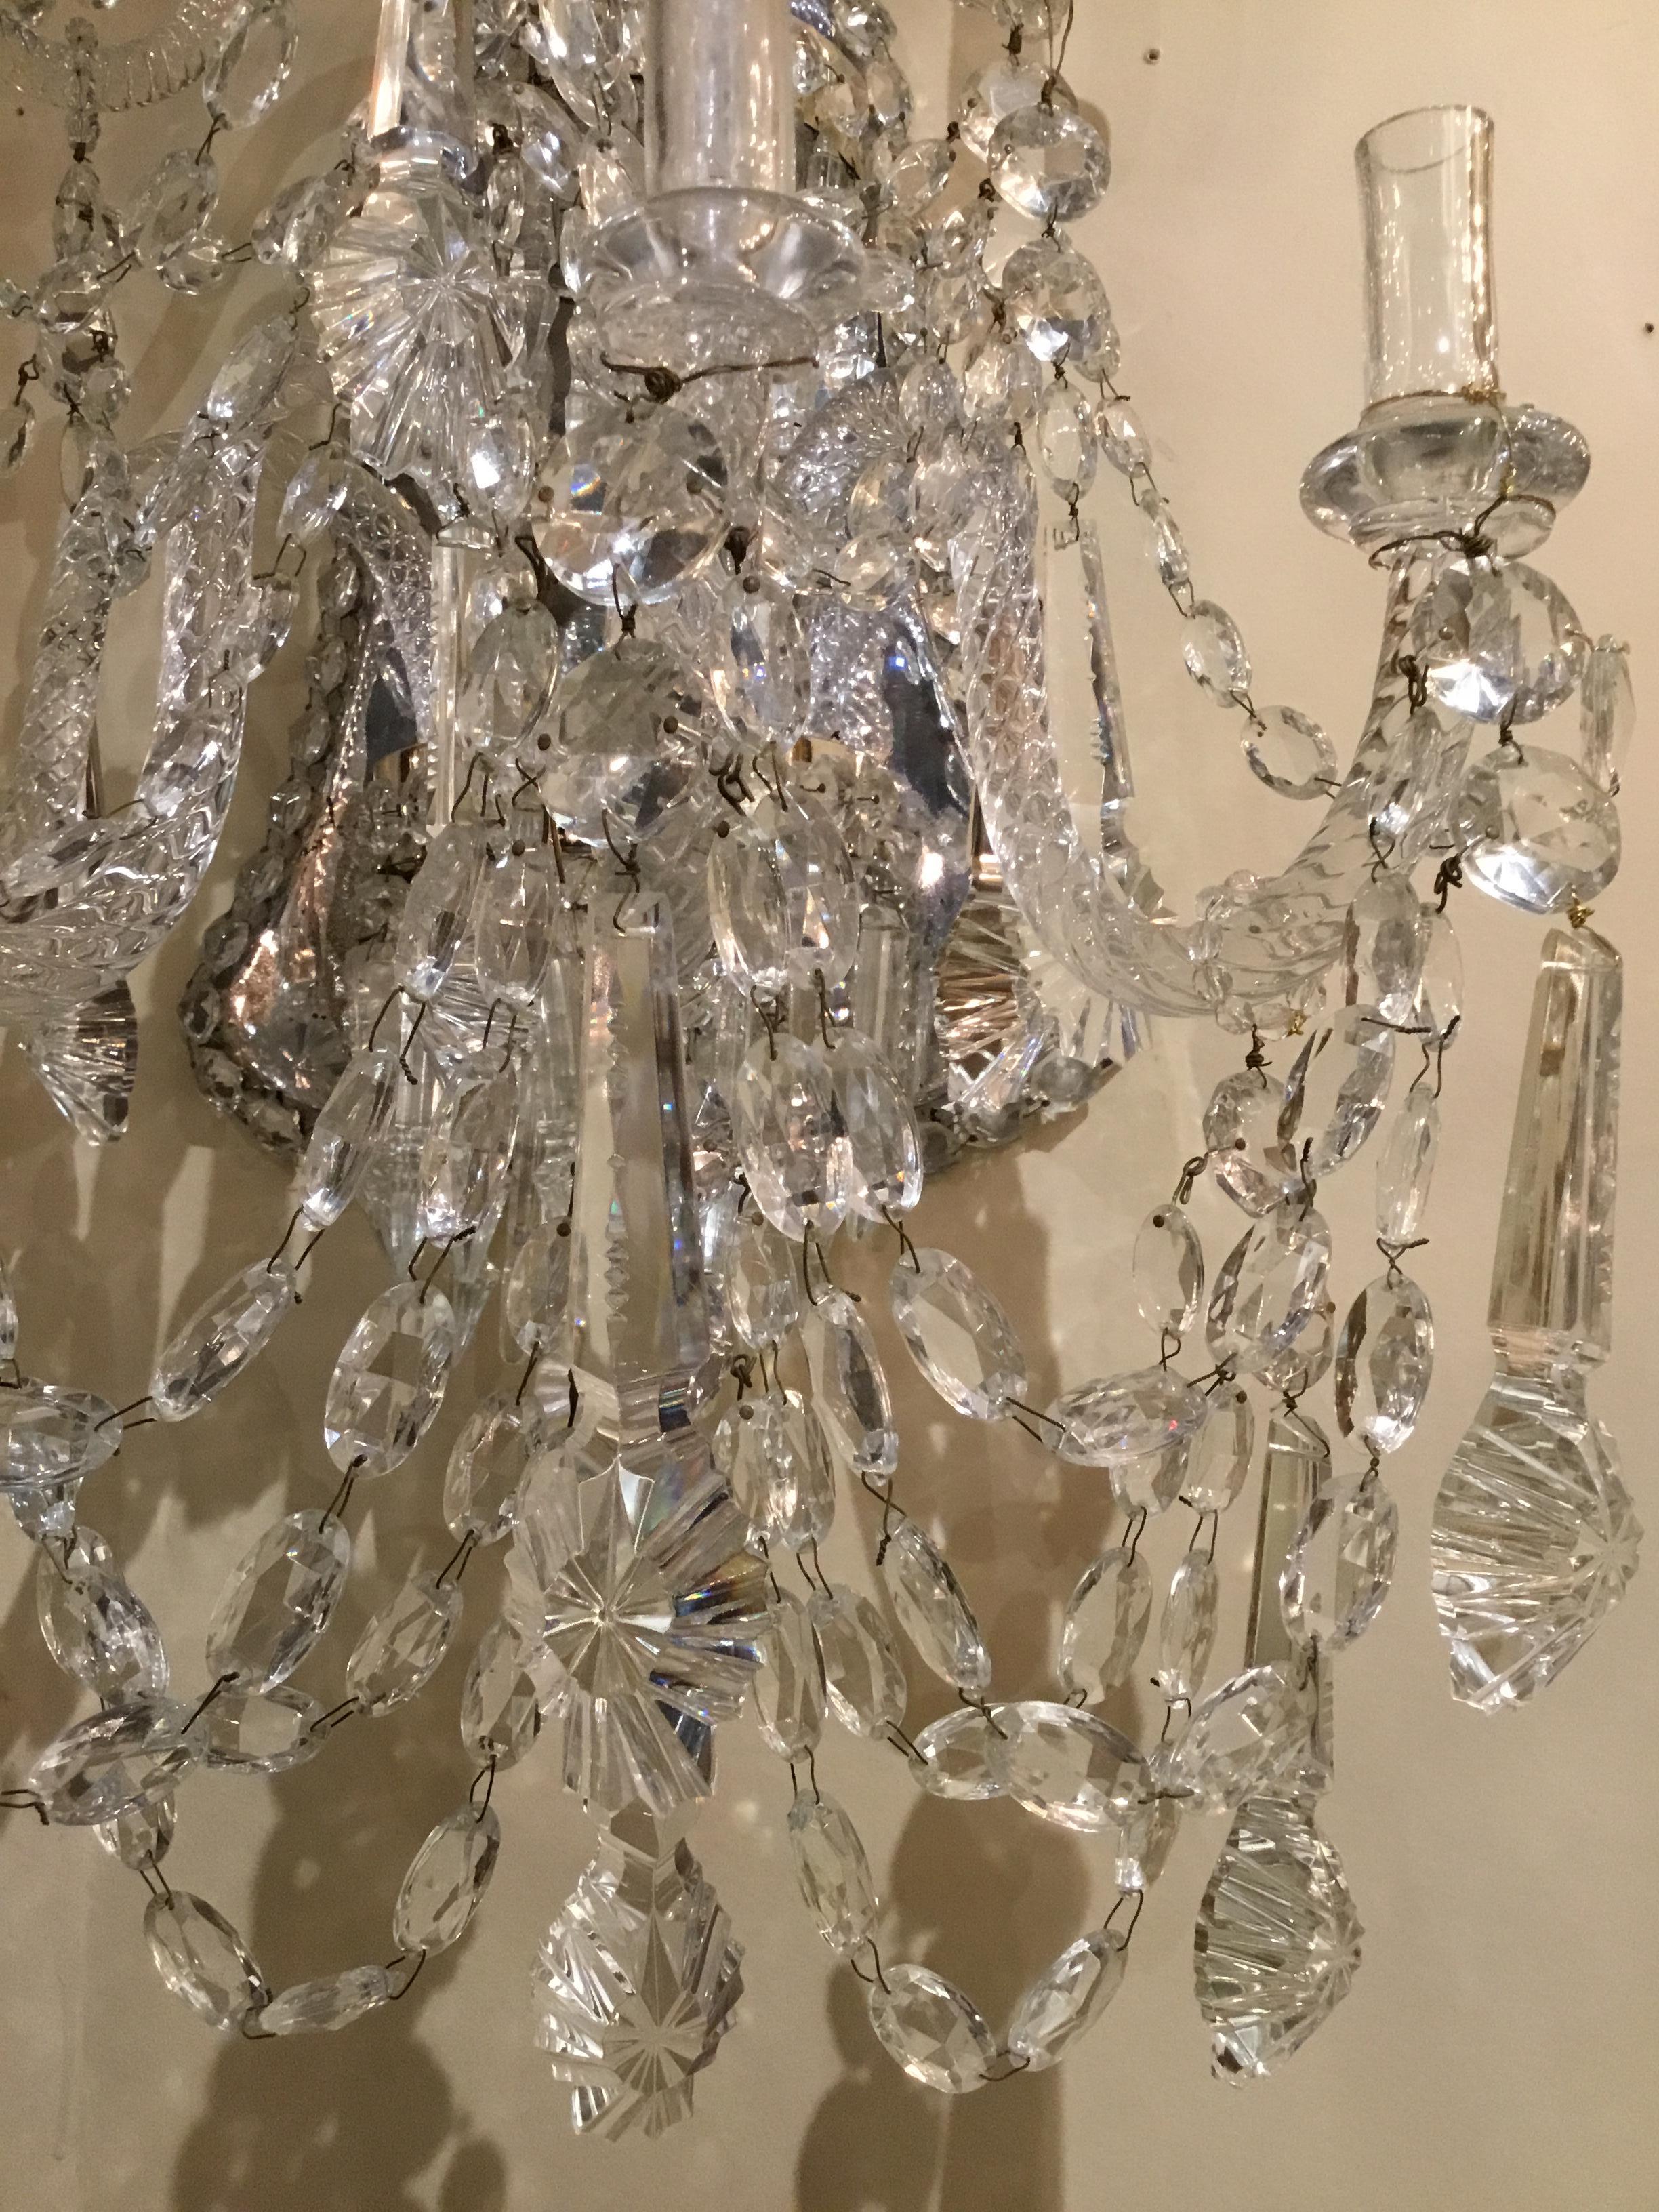 Large Pair of Venetian Crystal Sconces, Seven Candles, Silver Metal Backs In Excellent Condition For Sale In Houston, TX